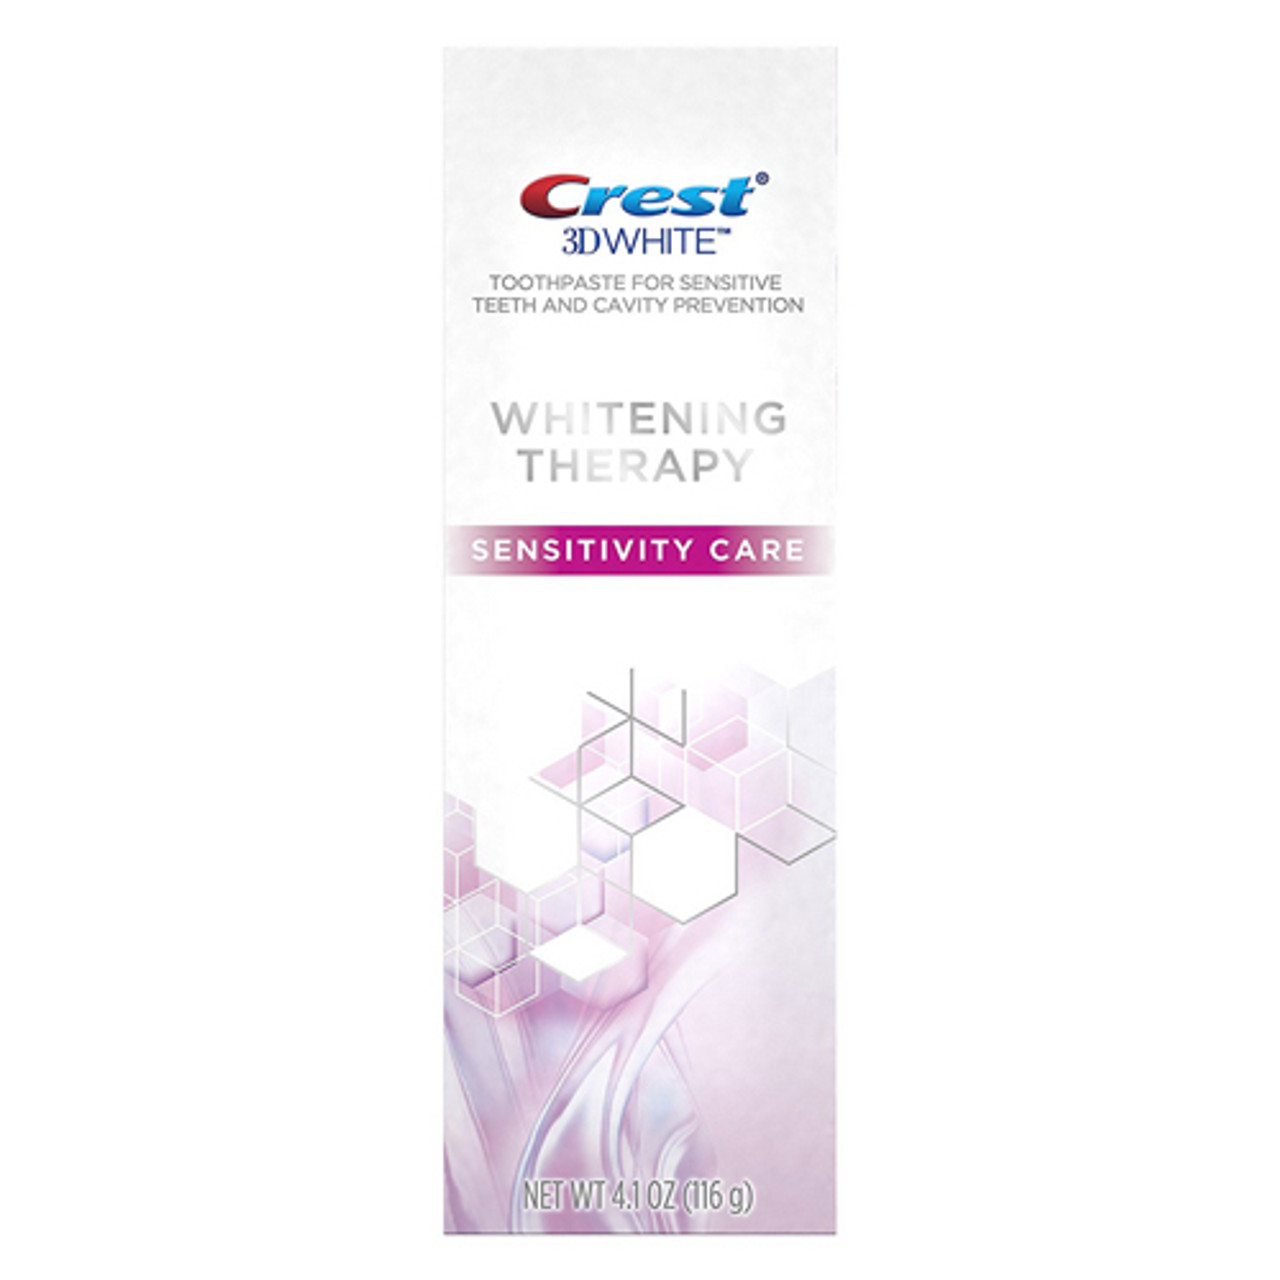 Crest 3D White Whitening Therapy Toothpaste Charcoal with Ginger Oil, 4.1  oz